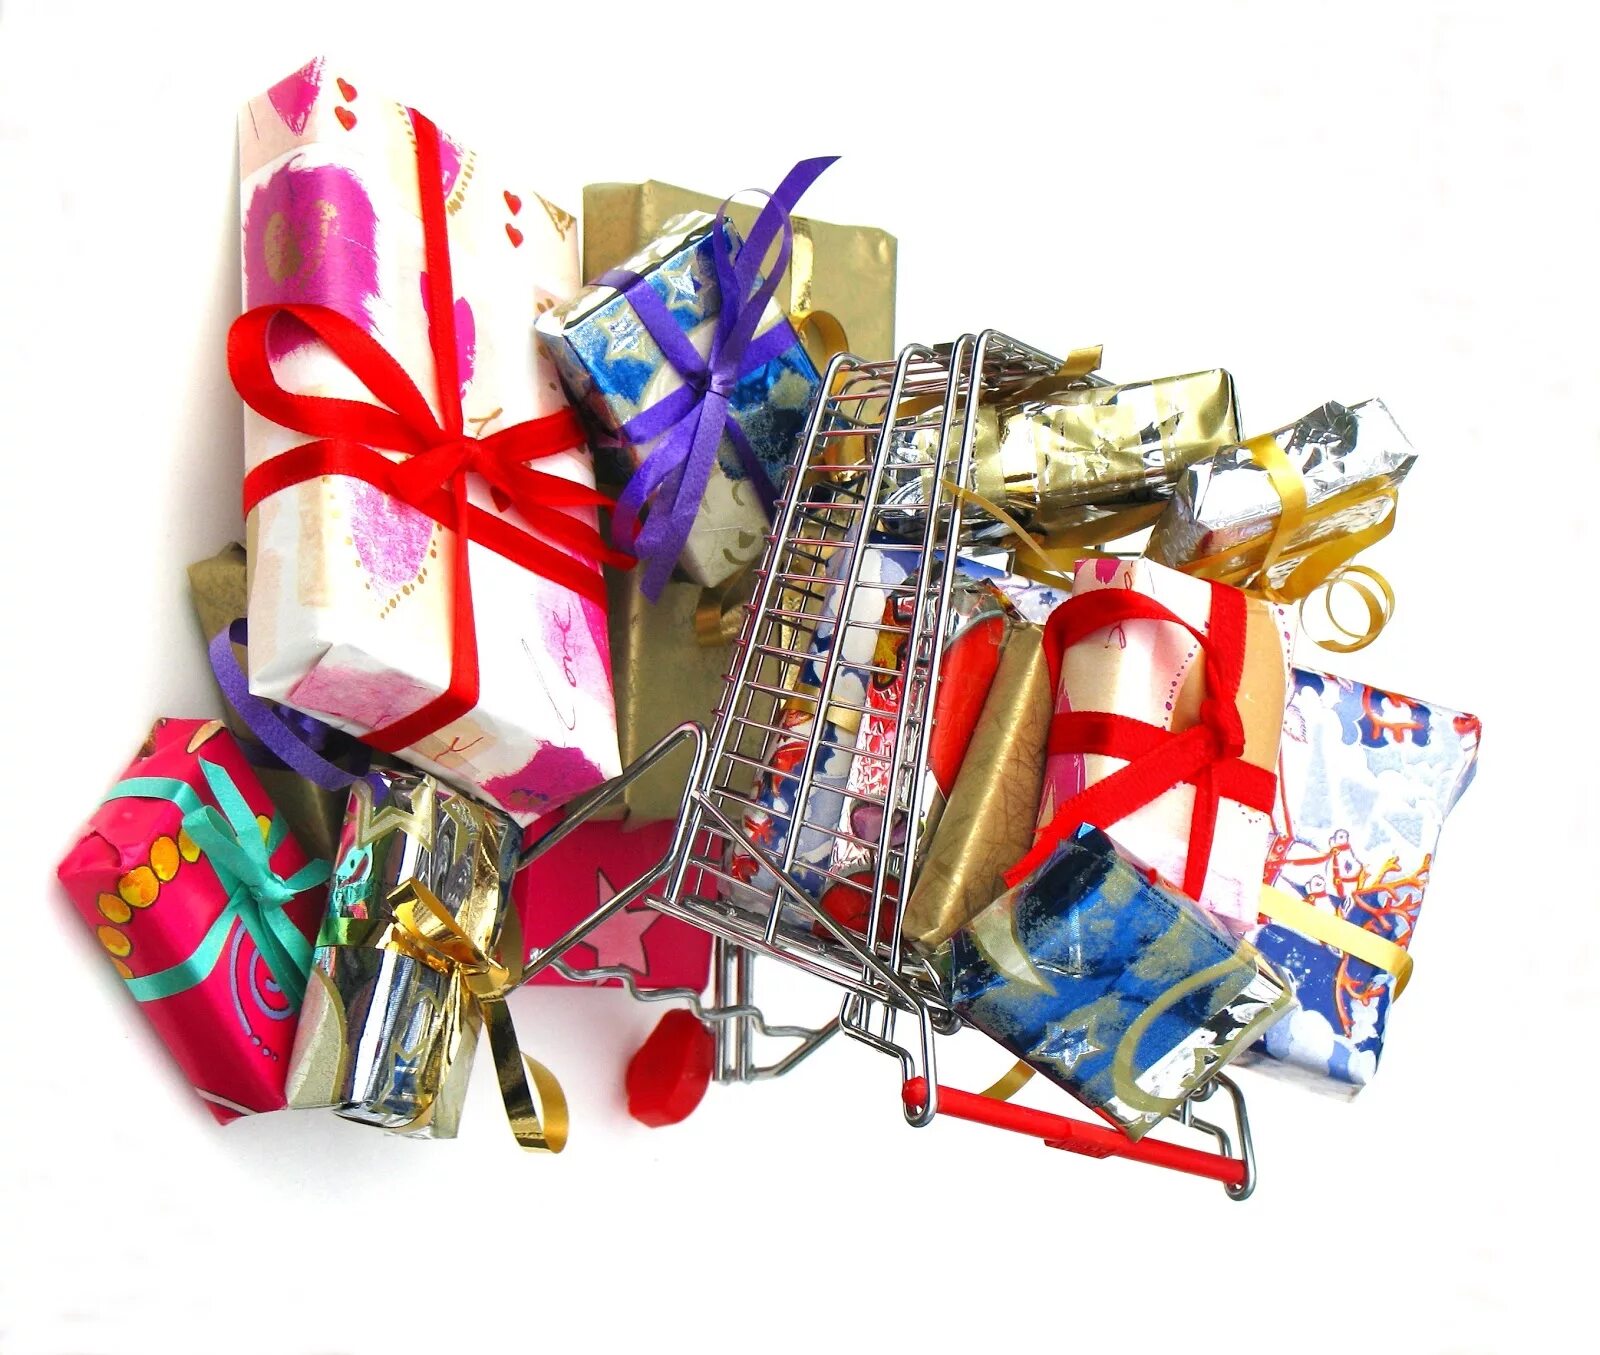 1 shopping for present. Gift items. Shopping presents. A lot of Gifts. Gift items Dubai Suppliers Gift items in Abu Dhabi.